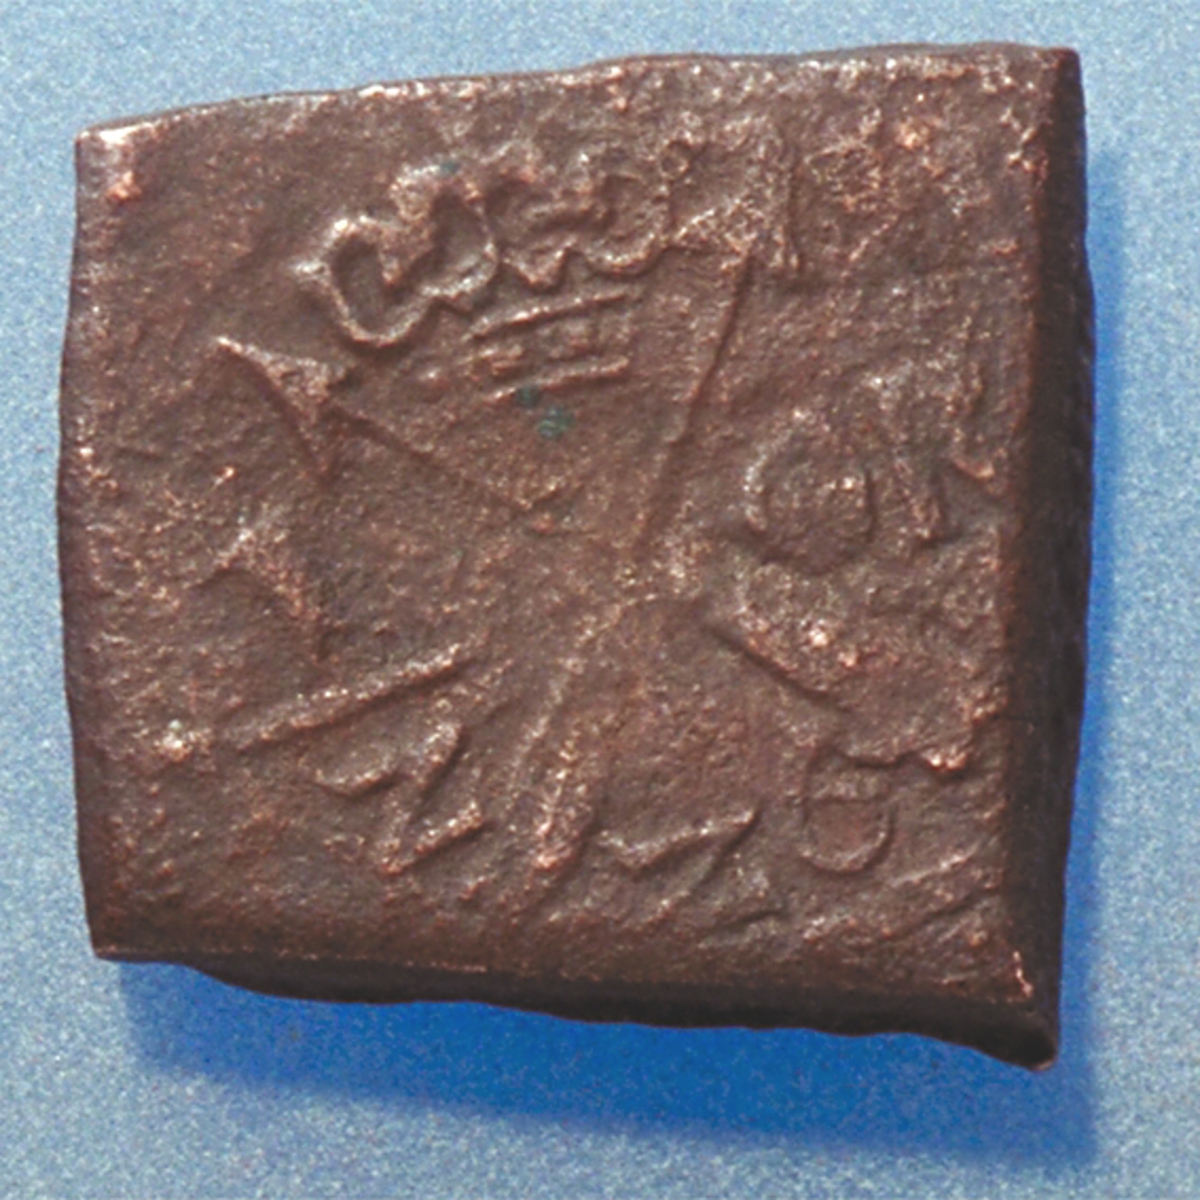 Â½- öre

Fyrkantigt mynt.

I bra skick, men slitet.

Vikt: 13,2 gram.



Text in English: Square-shaped coin. Denomination: Â½ - öre.

The obverse side has a Vasa sheaf in the centre, faintly visible. The initials G R appear in capital letters. G placed to the left and R to the right of the sheaf. G is only faintly visible.

The coin stamp is off-centre. The frame is partly visible.

The reverse side has two crossed arrows beneath a crown, faintly visible. On the left hand side is the fraction Â½, and on the right the initials ÖR, faintly visible.

The two digit year of coinage, 26 (1626), is placed beneath the arrows.

The coin stamp is off-centre. The frame is partly visible.



Present condition: both sides are worn.

Weight: 13,2 gram.